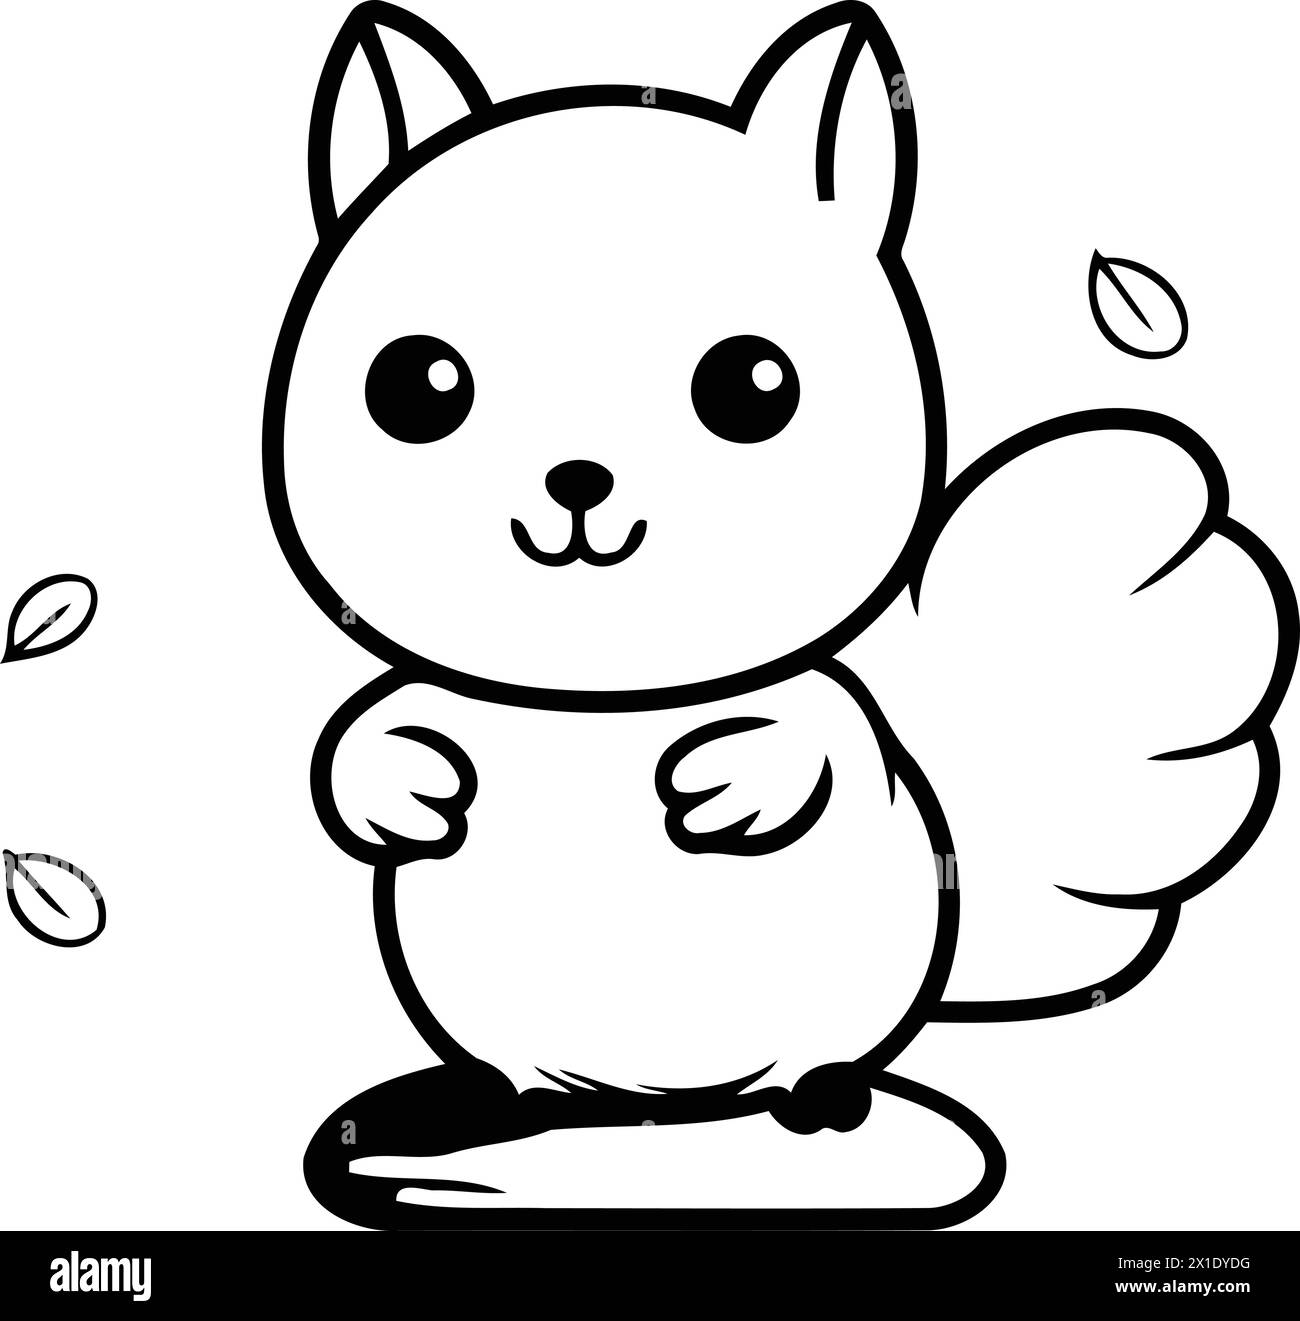 Cute squirrel character. Vector illustration in cartoon style on white background. Stock Vector